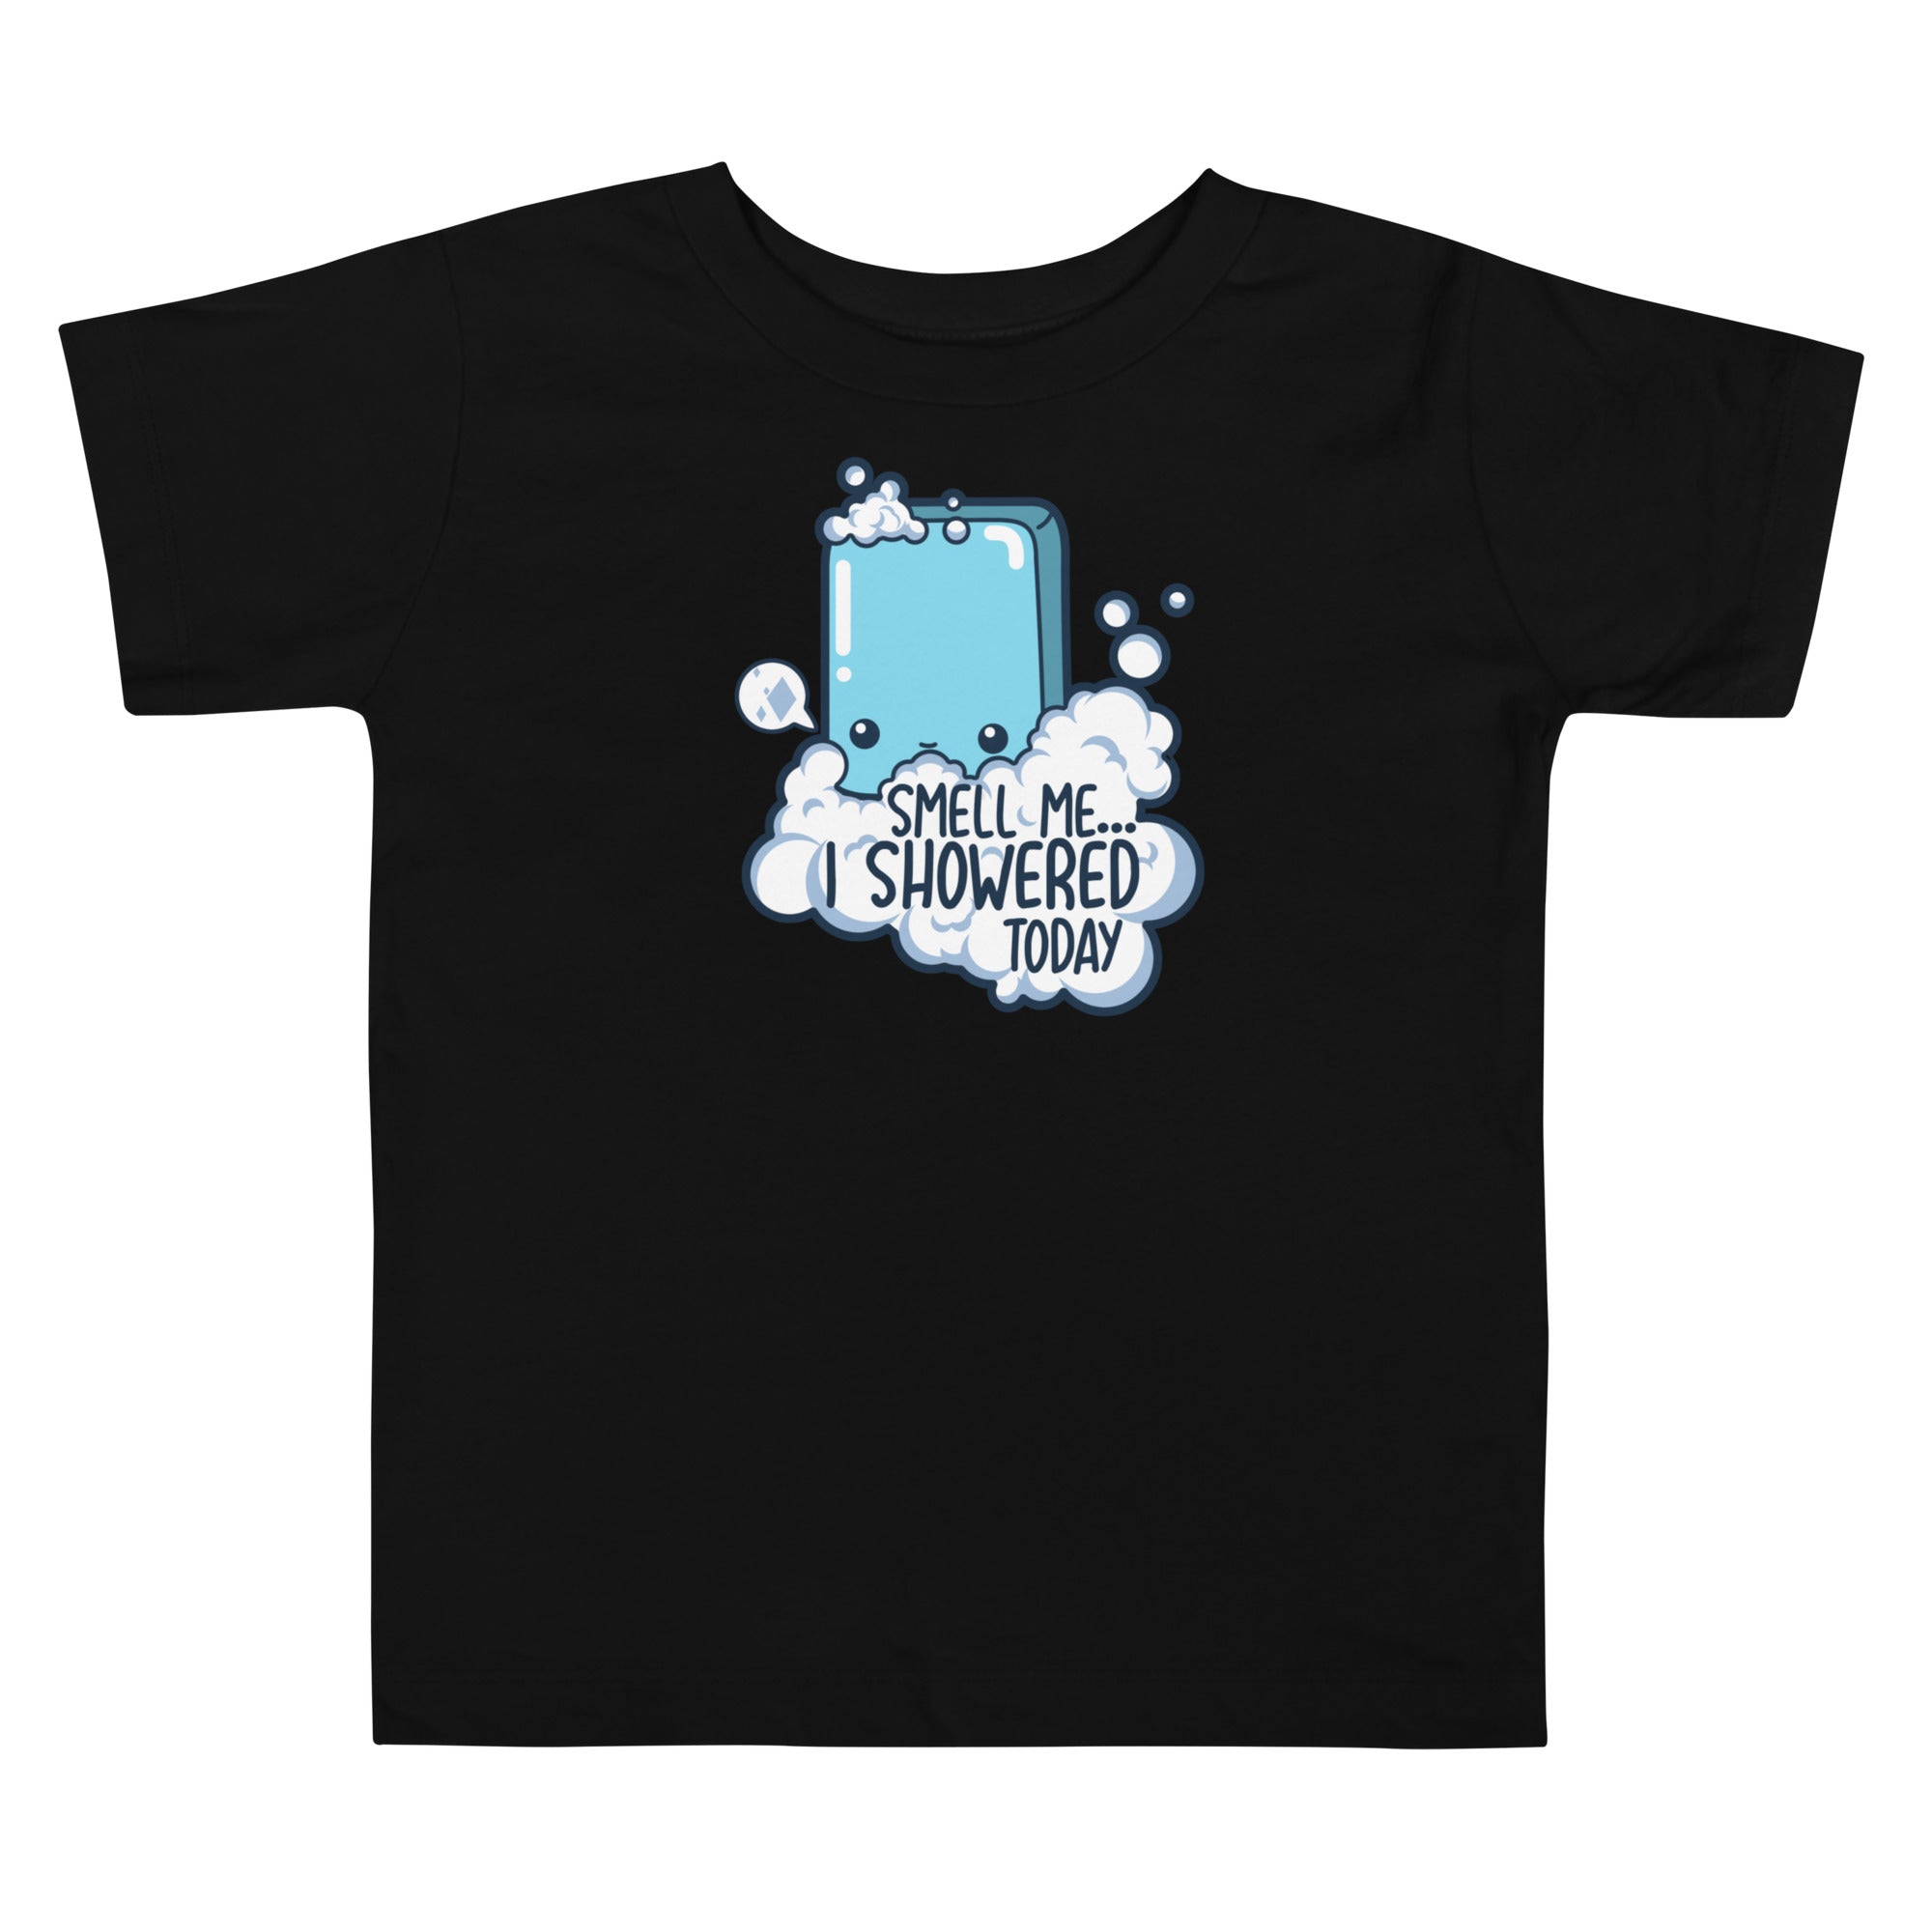 SMELL ME I SHOWERED TODAY - Toddler Tee - ChubbleGumLLC